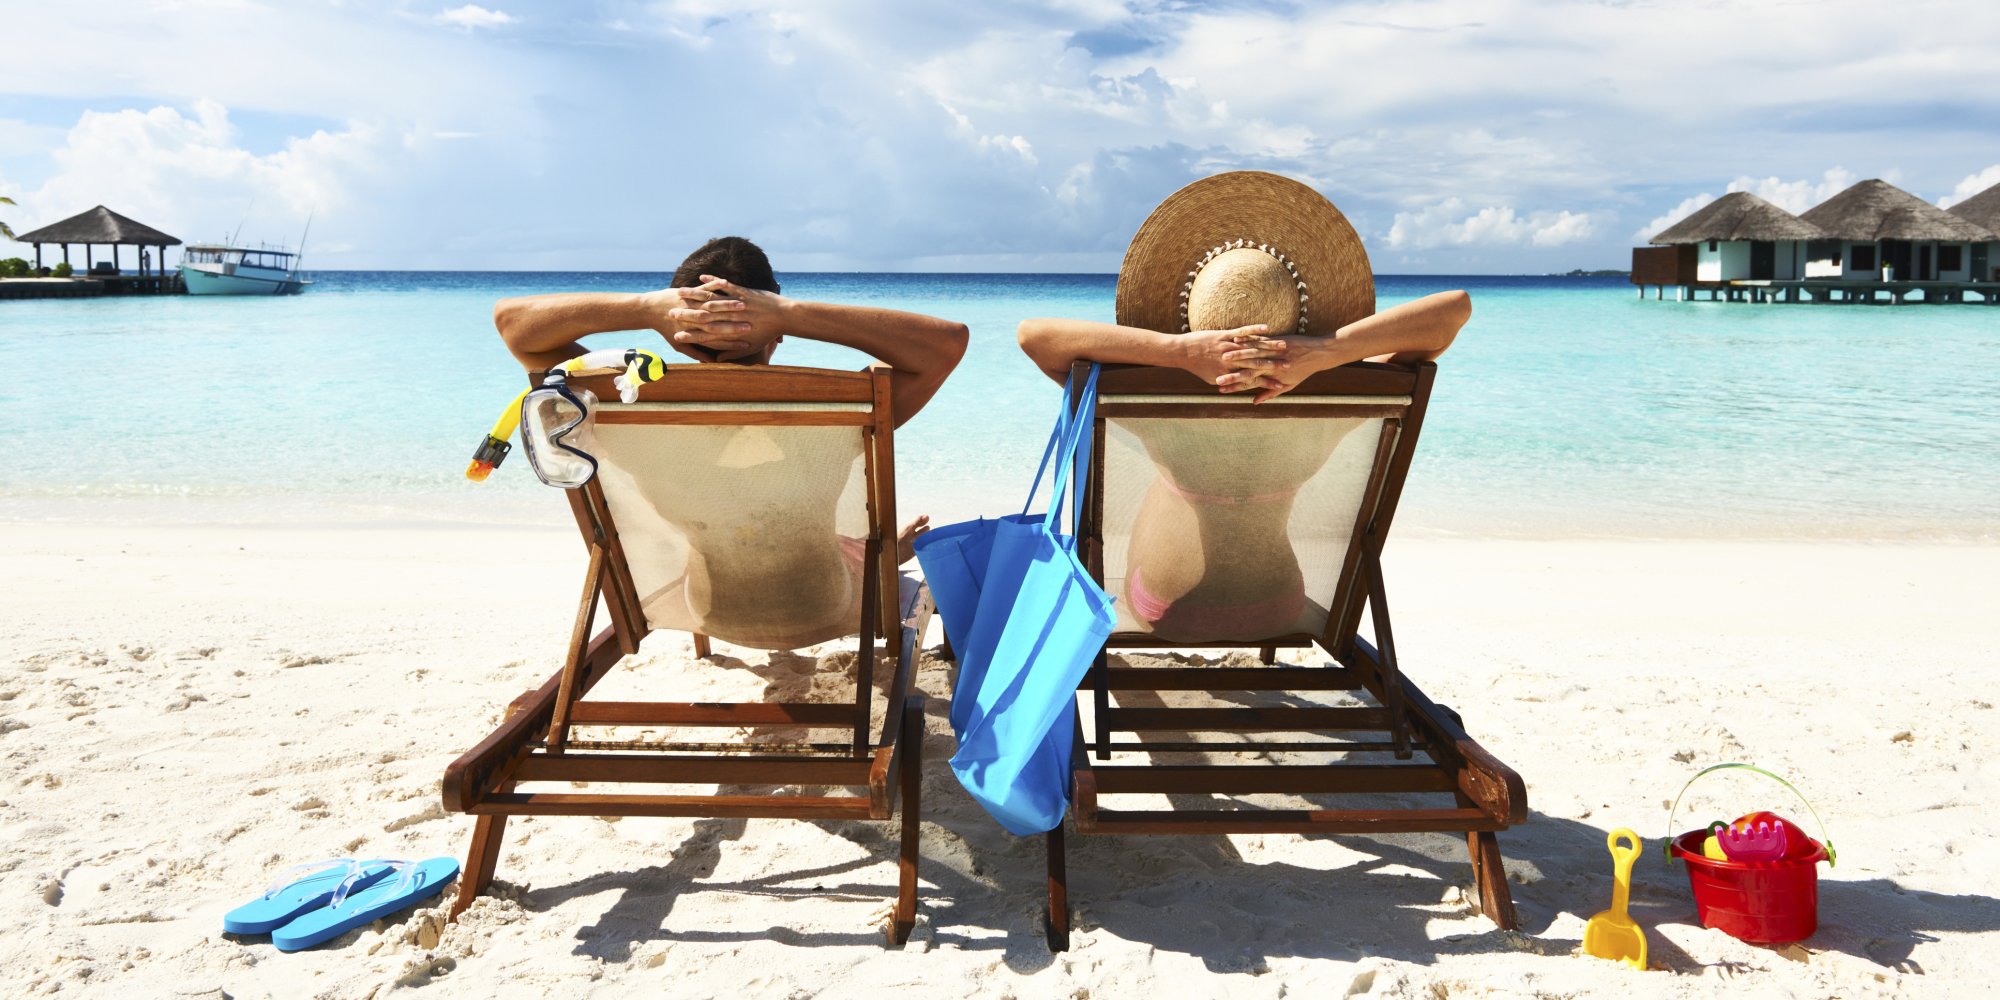 Two people sitting in chairs on a beach vacation